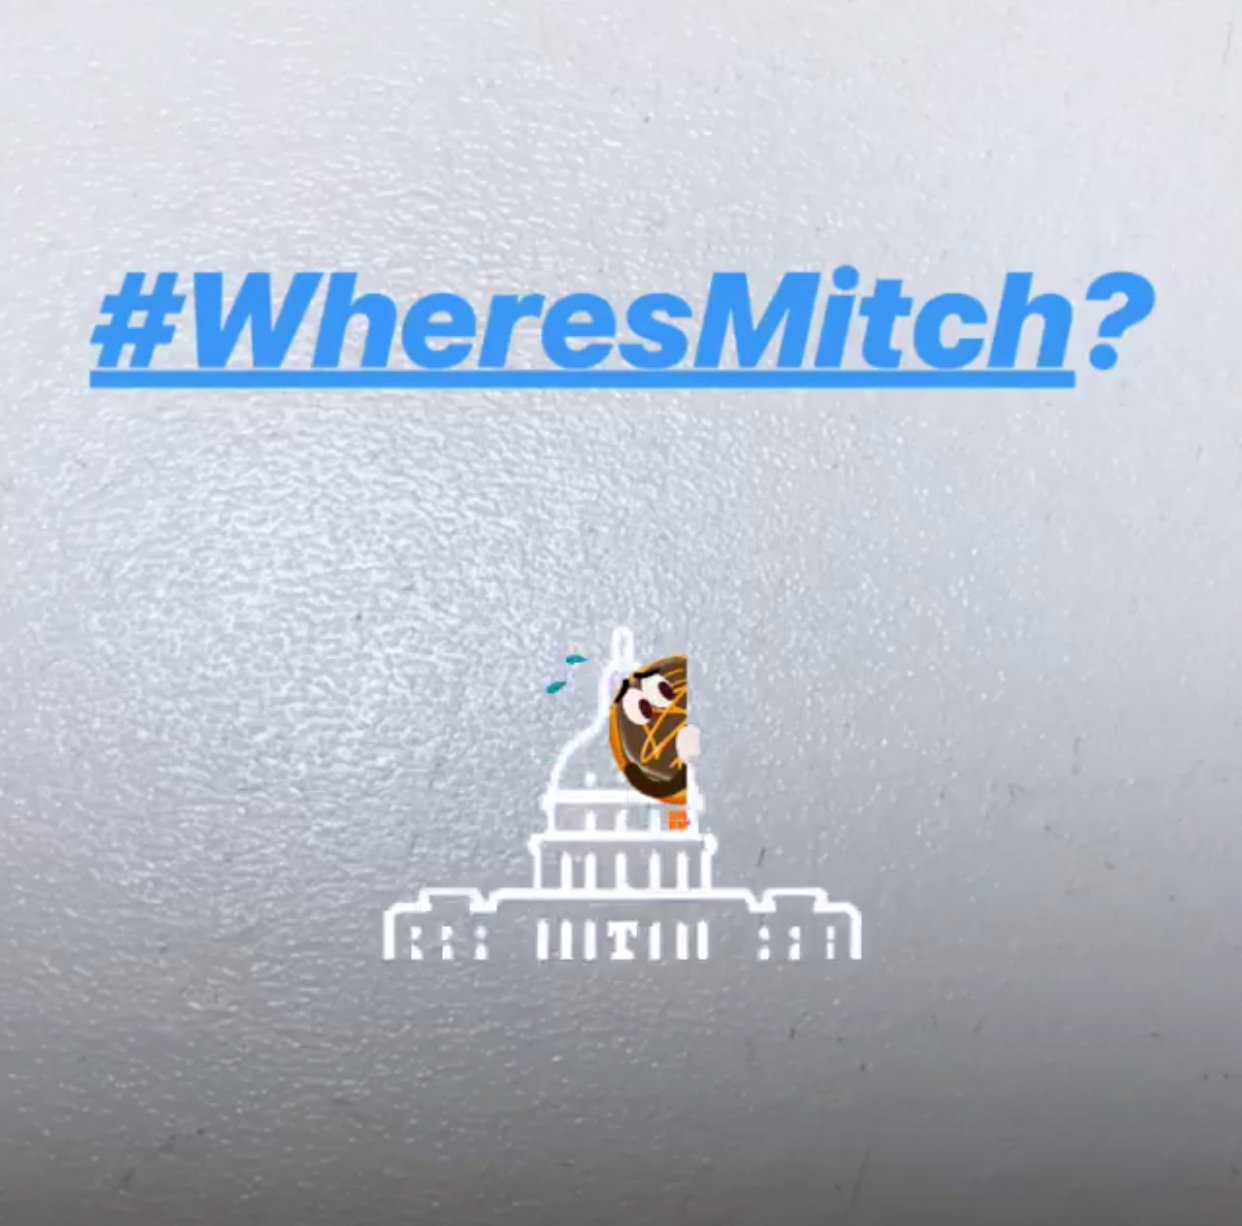 We the people want to know where Mitch McConnell is at? #WheresMitch #OpenTheGovernment